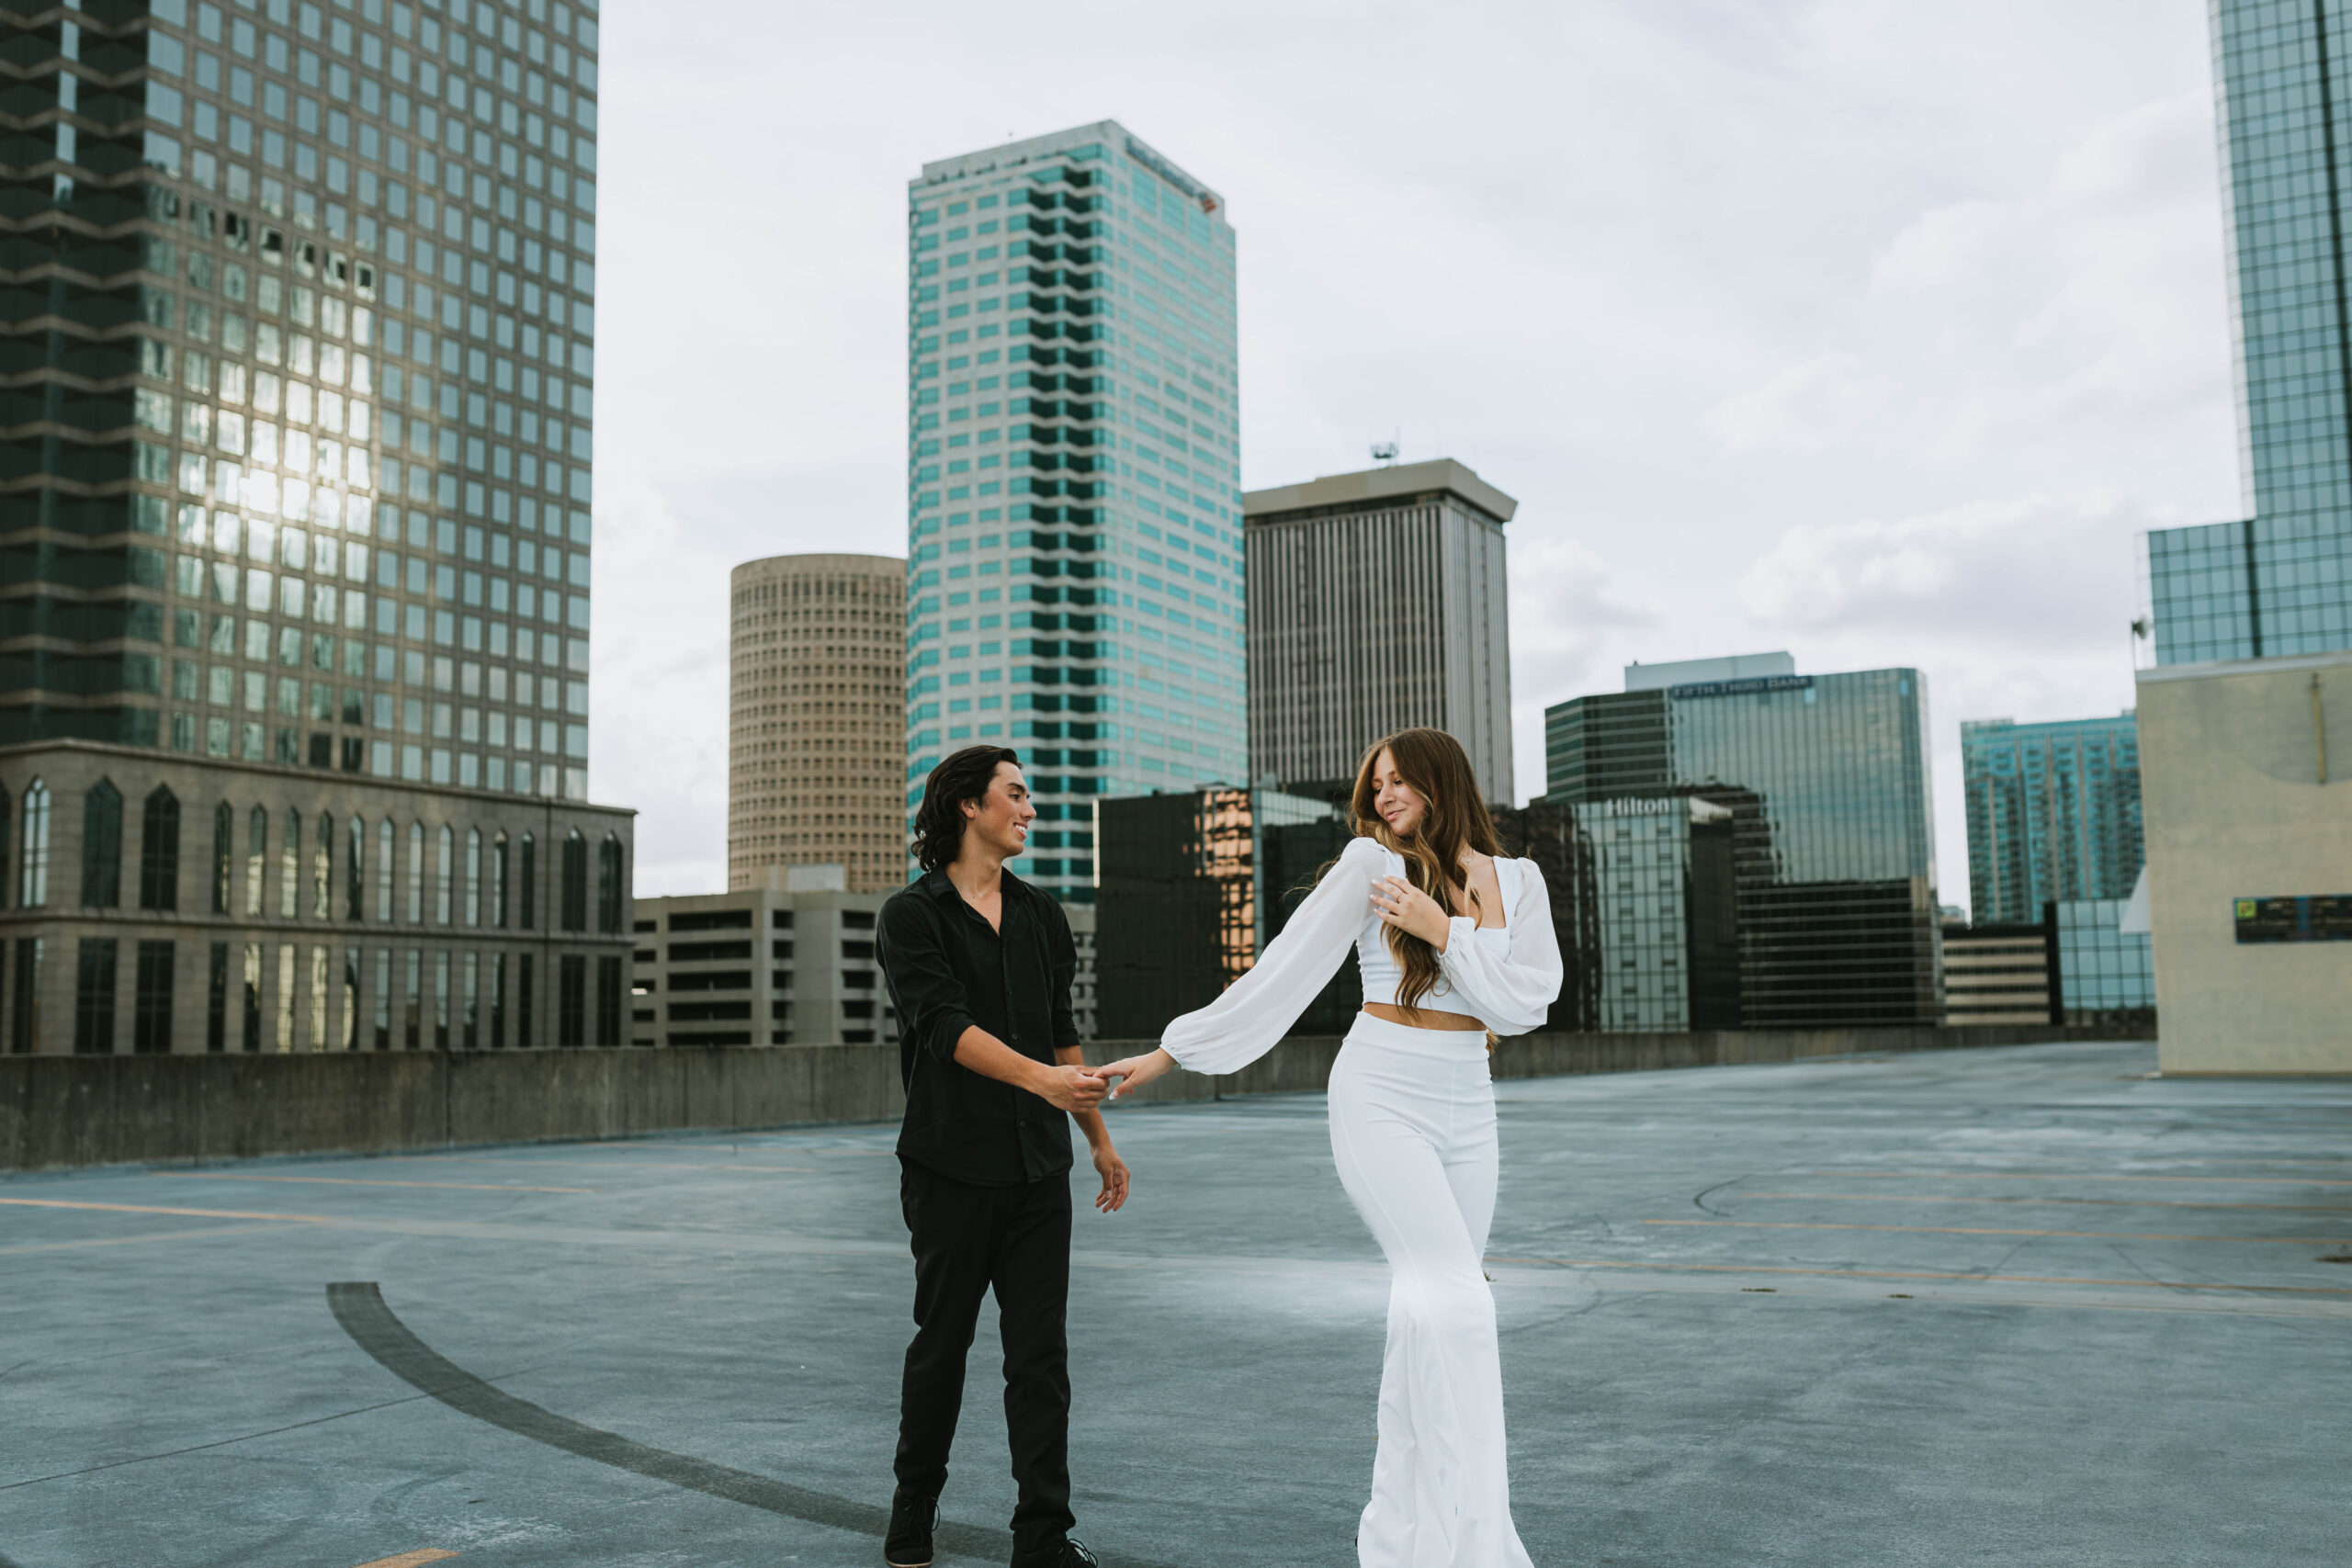 Bride and Groom Elope in Tampa FL Urban Couple Photoshoot Tampa Skyline